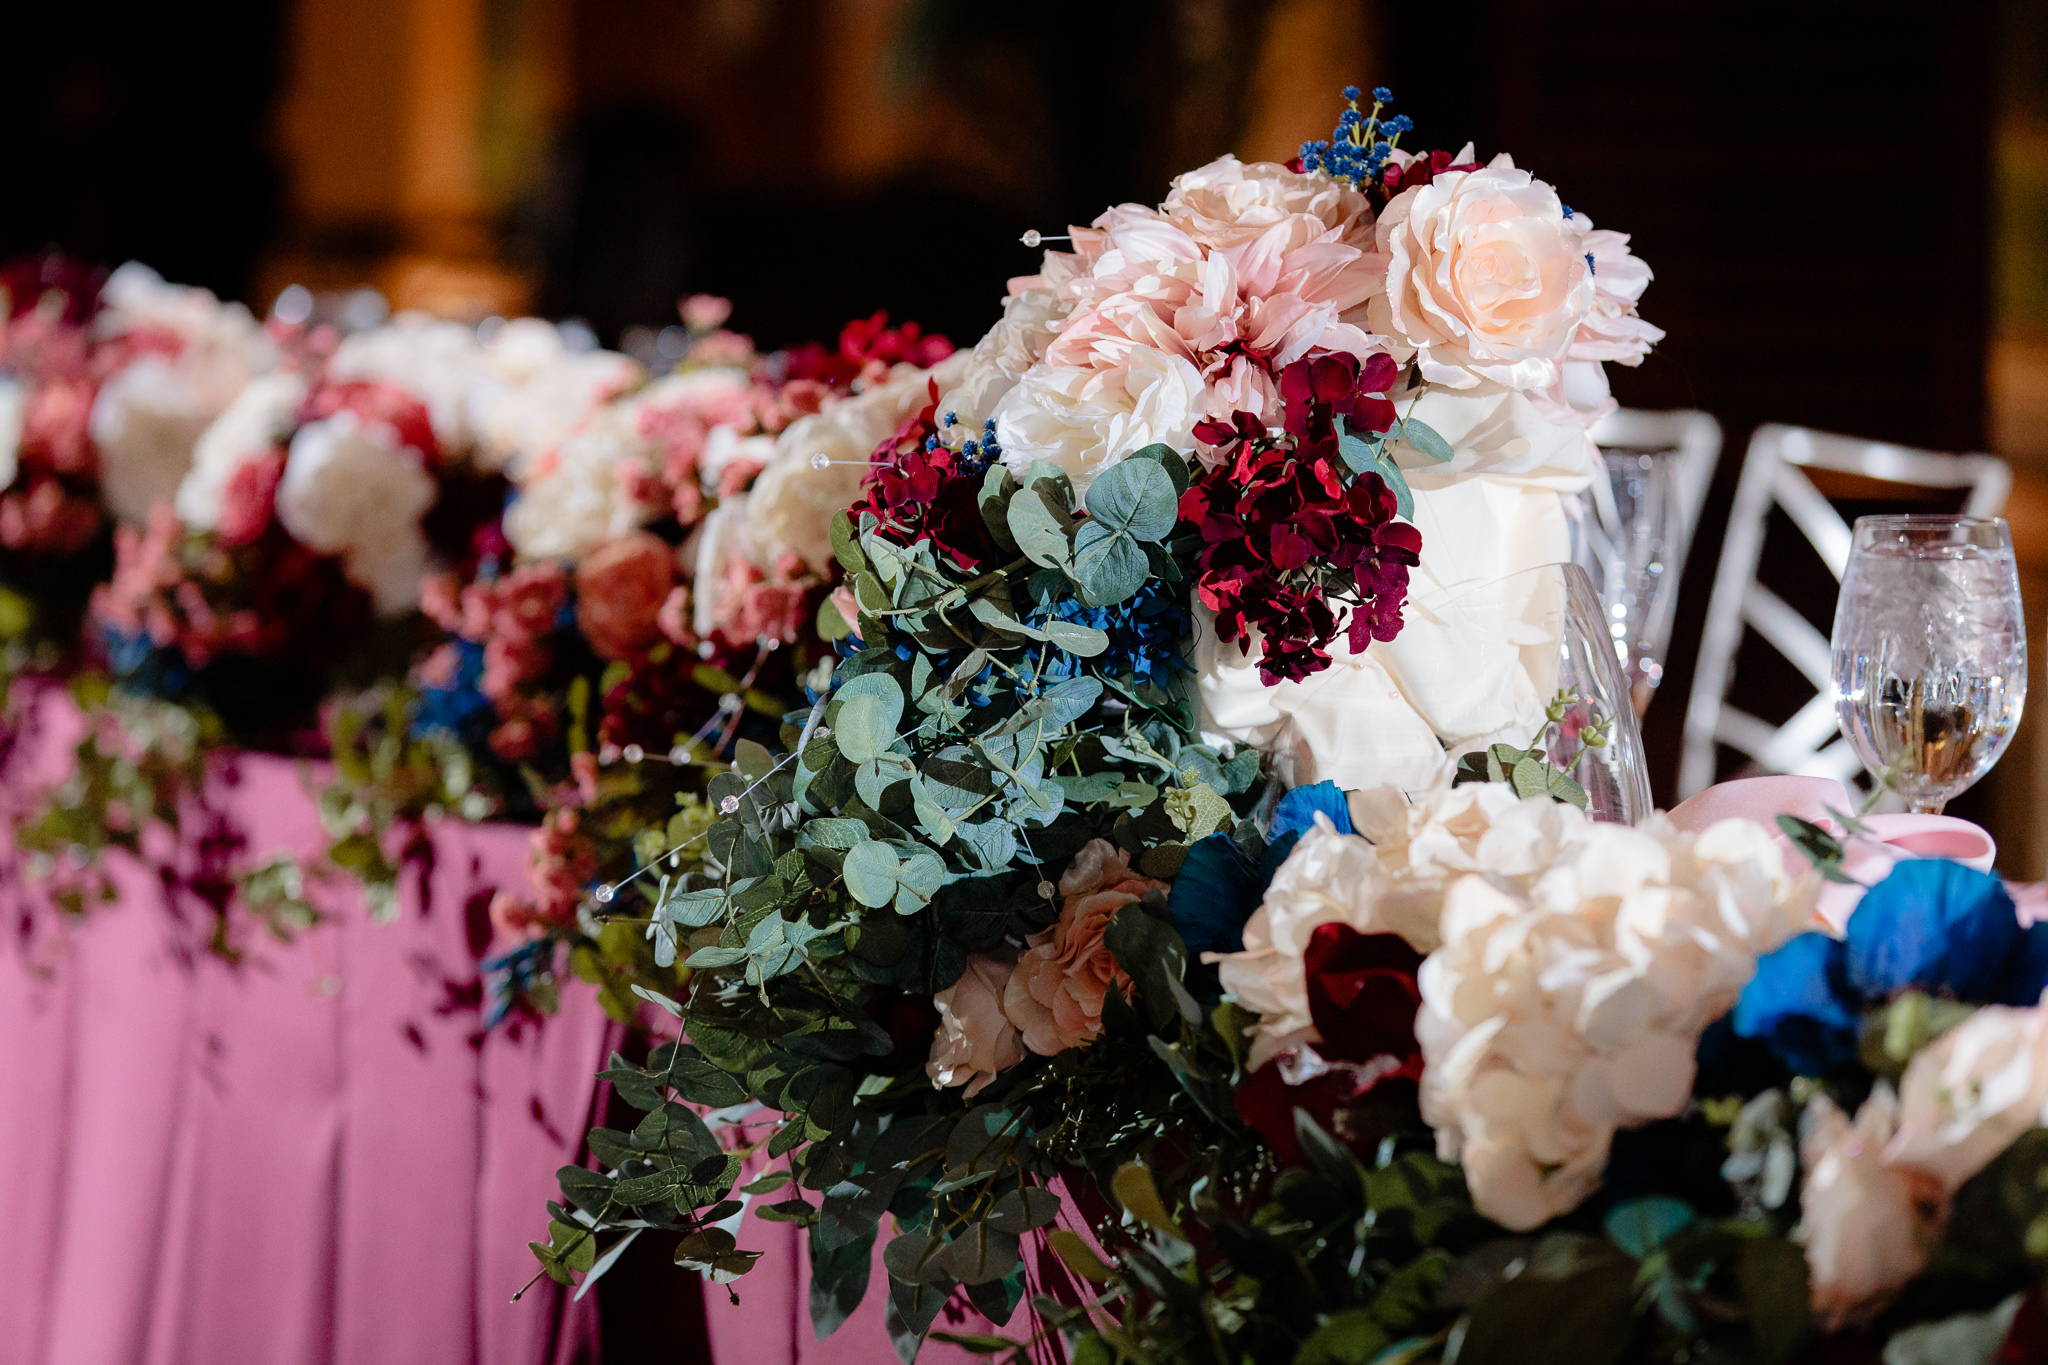 Artificial flower bouquets which were all made by the bride at the Pennsylvanian